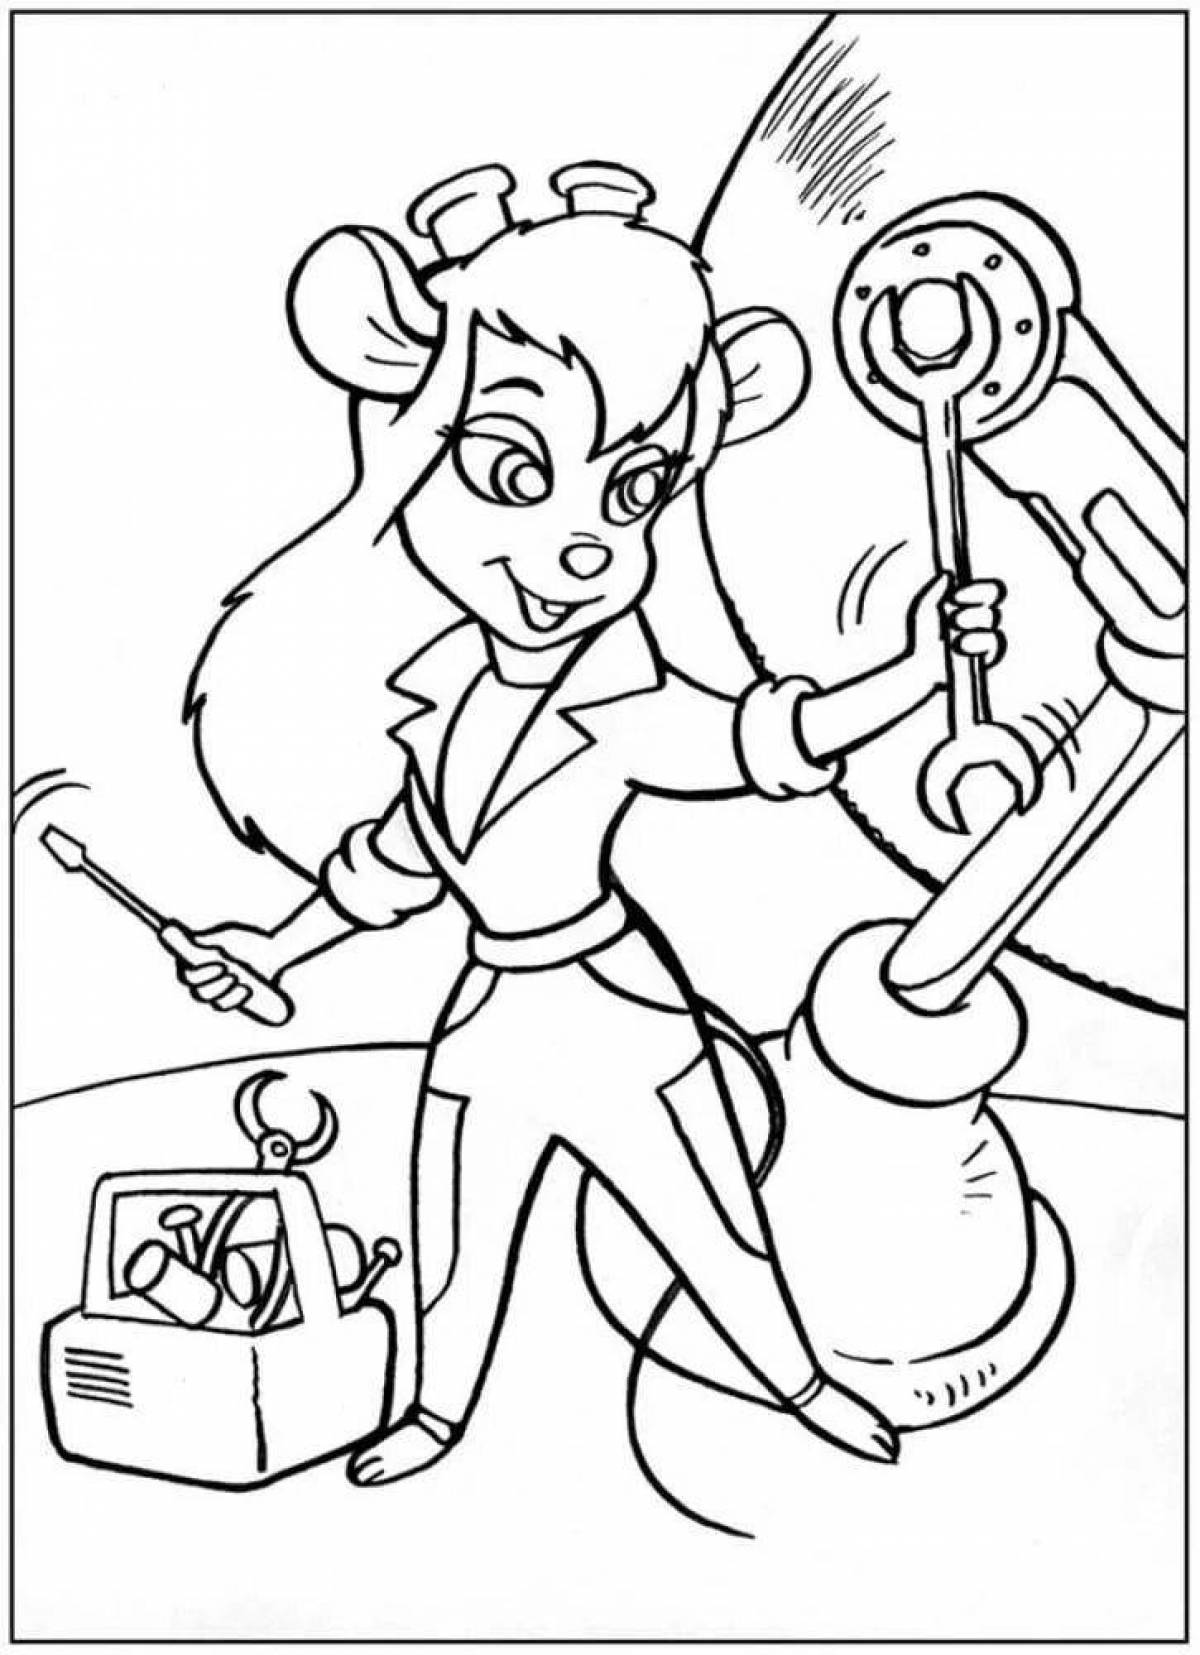 Animated screw coloring page